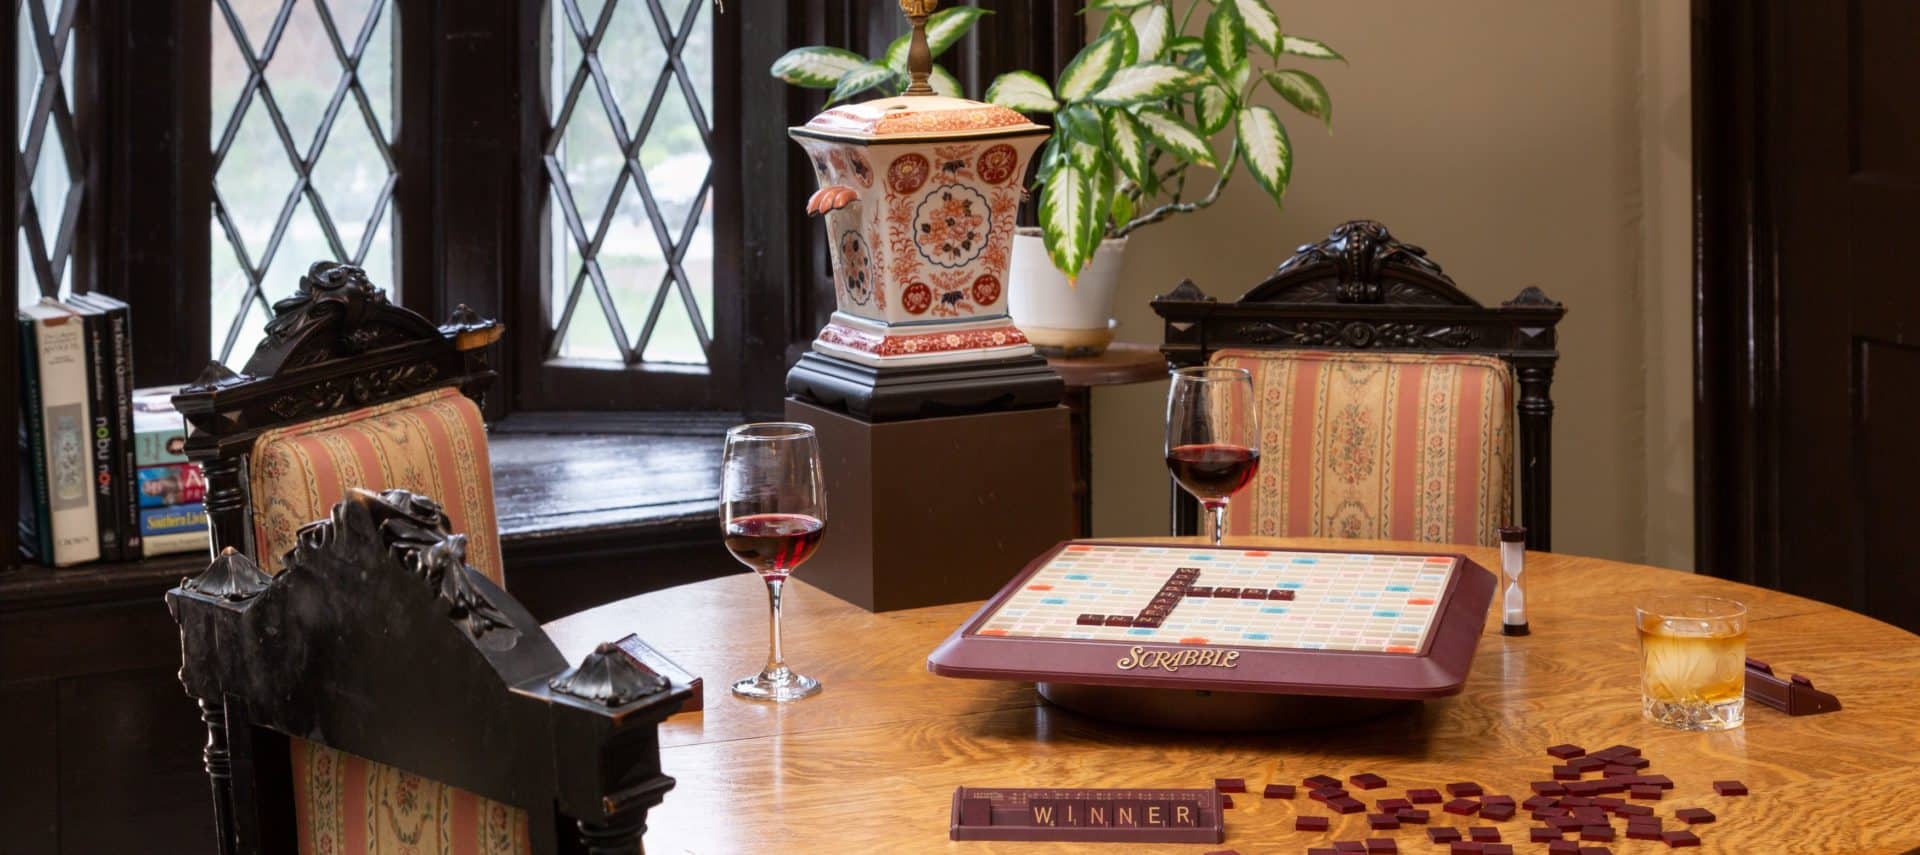 Game table with Scrabble tiles spelling winner. A glass of wine and a glass of bourbon are on the table with a gothic bay window behind the table.